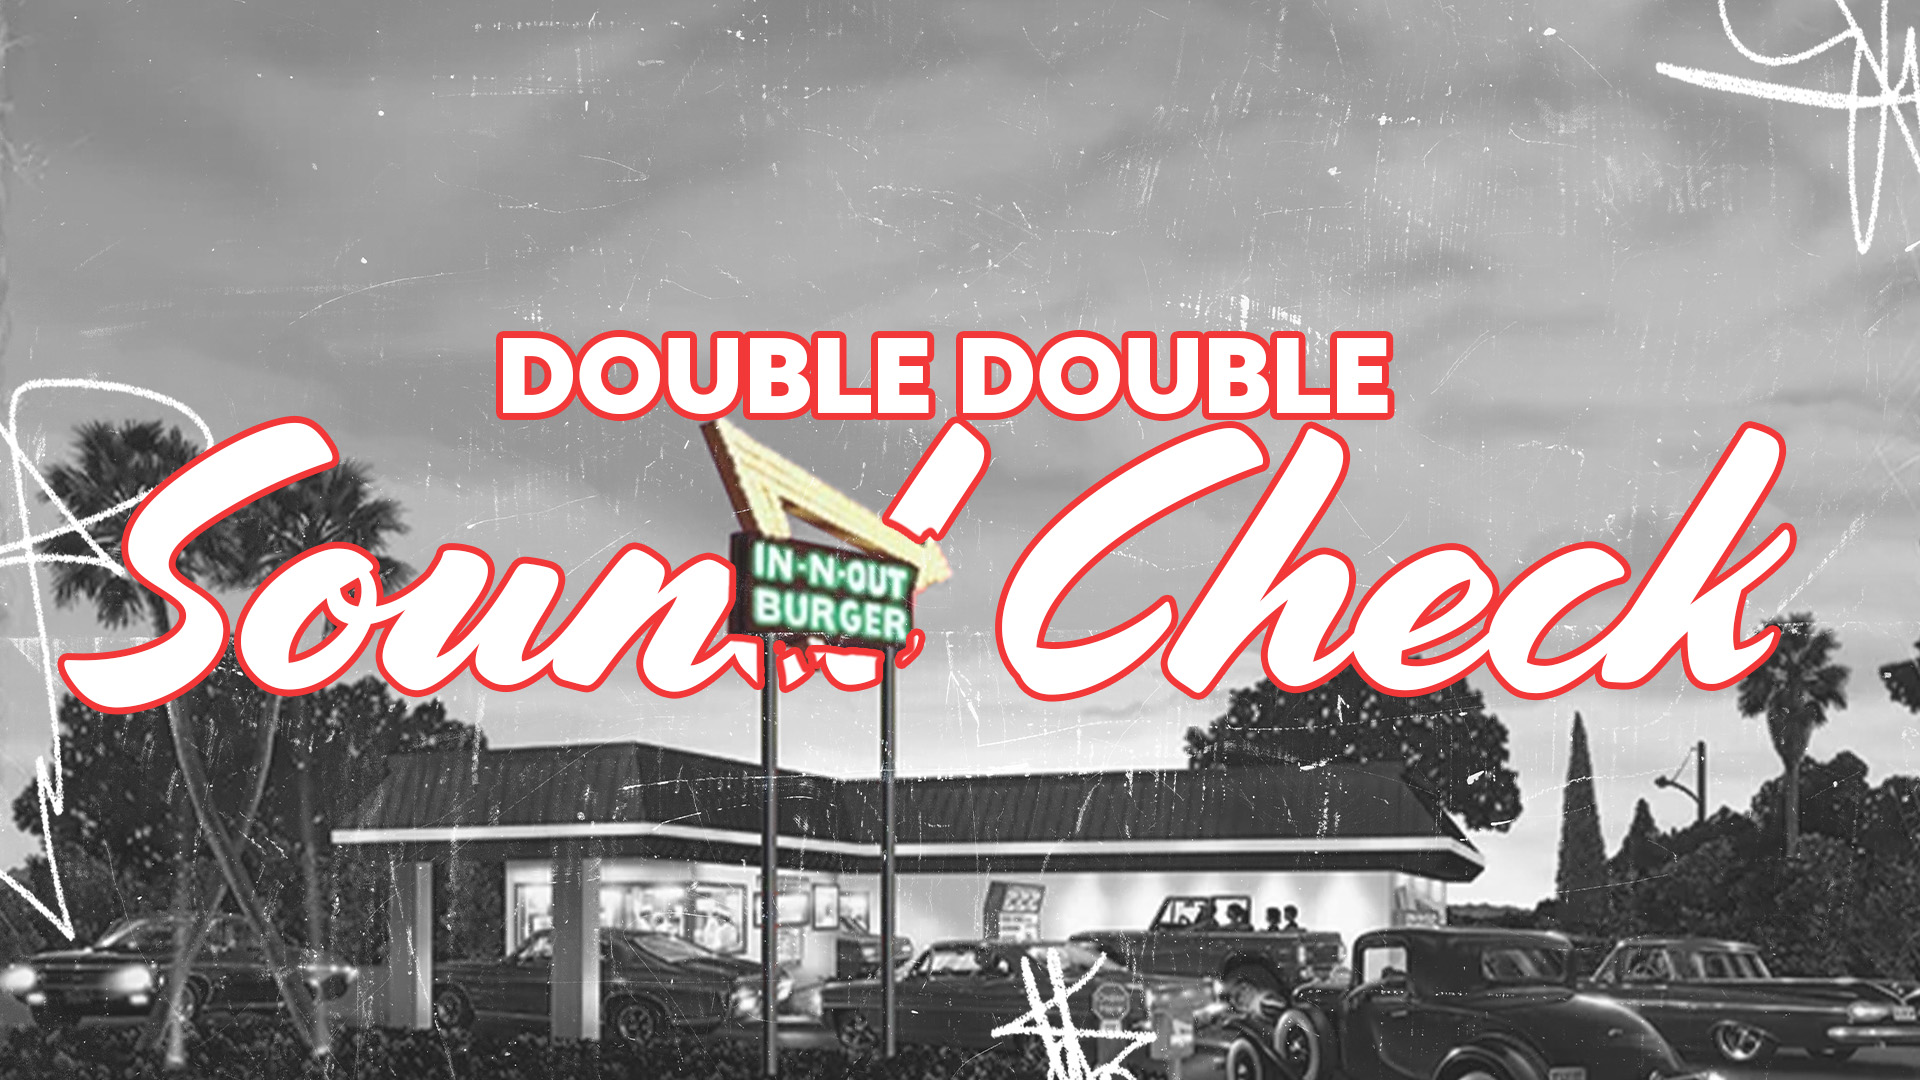 Image: Double Double Sound Check (In-N-Out Burger)